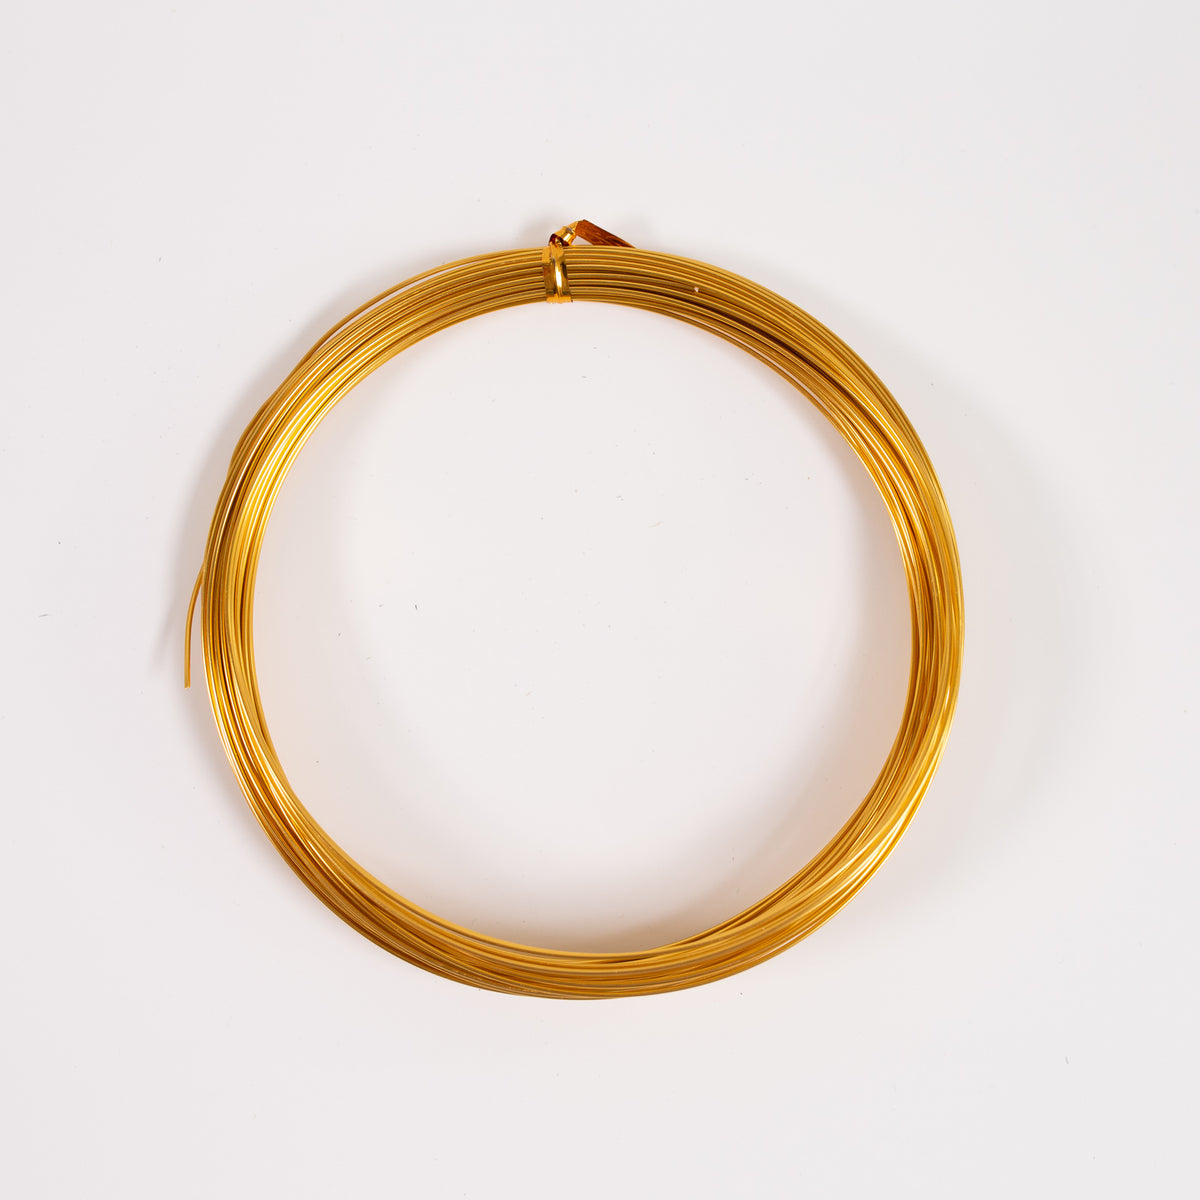 Iron wire Gold